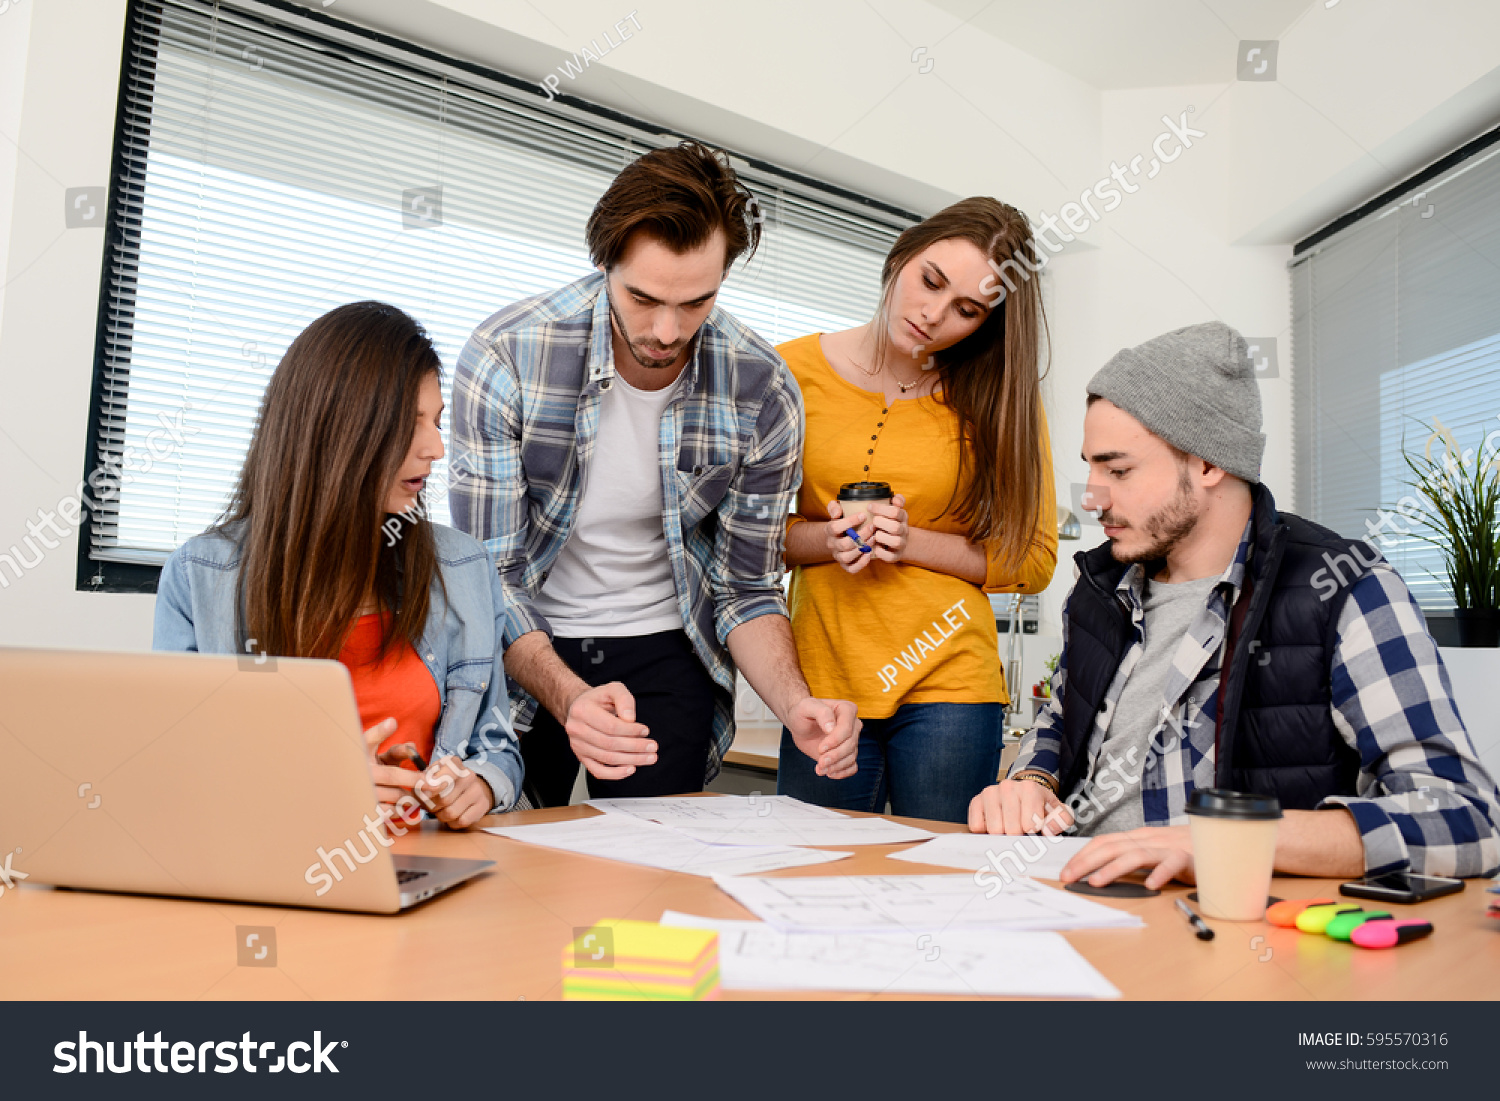 Group Young Cool Hipster Business People Stock Photo (Edit Now) 595570316 |  Shutterstock